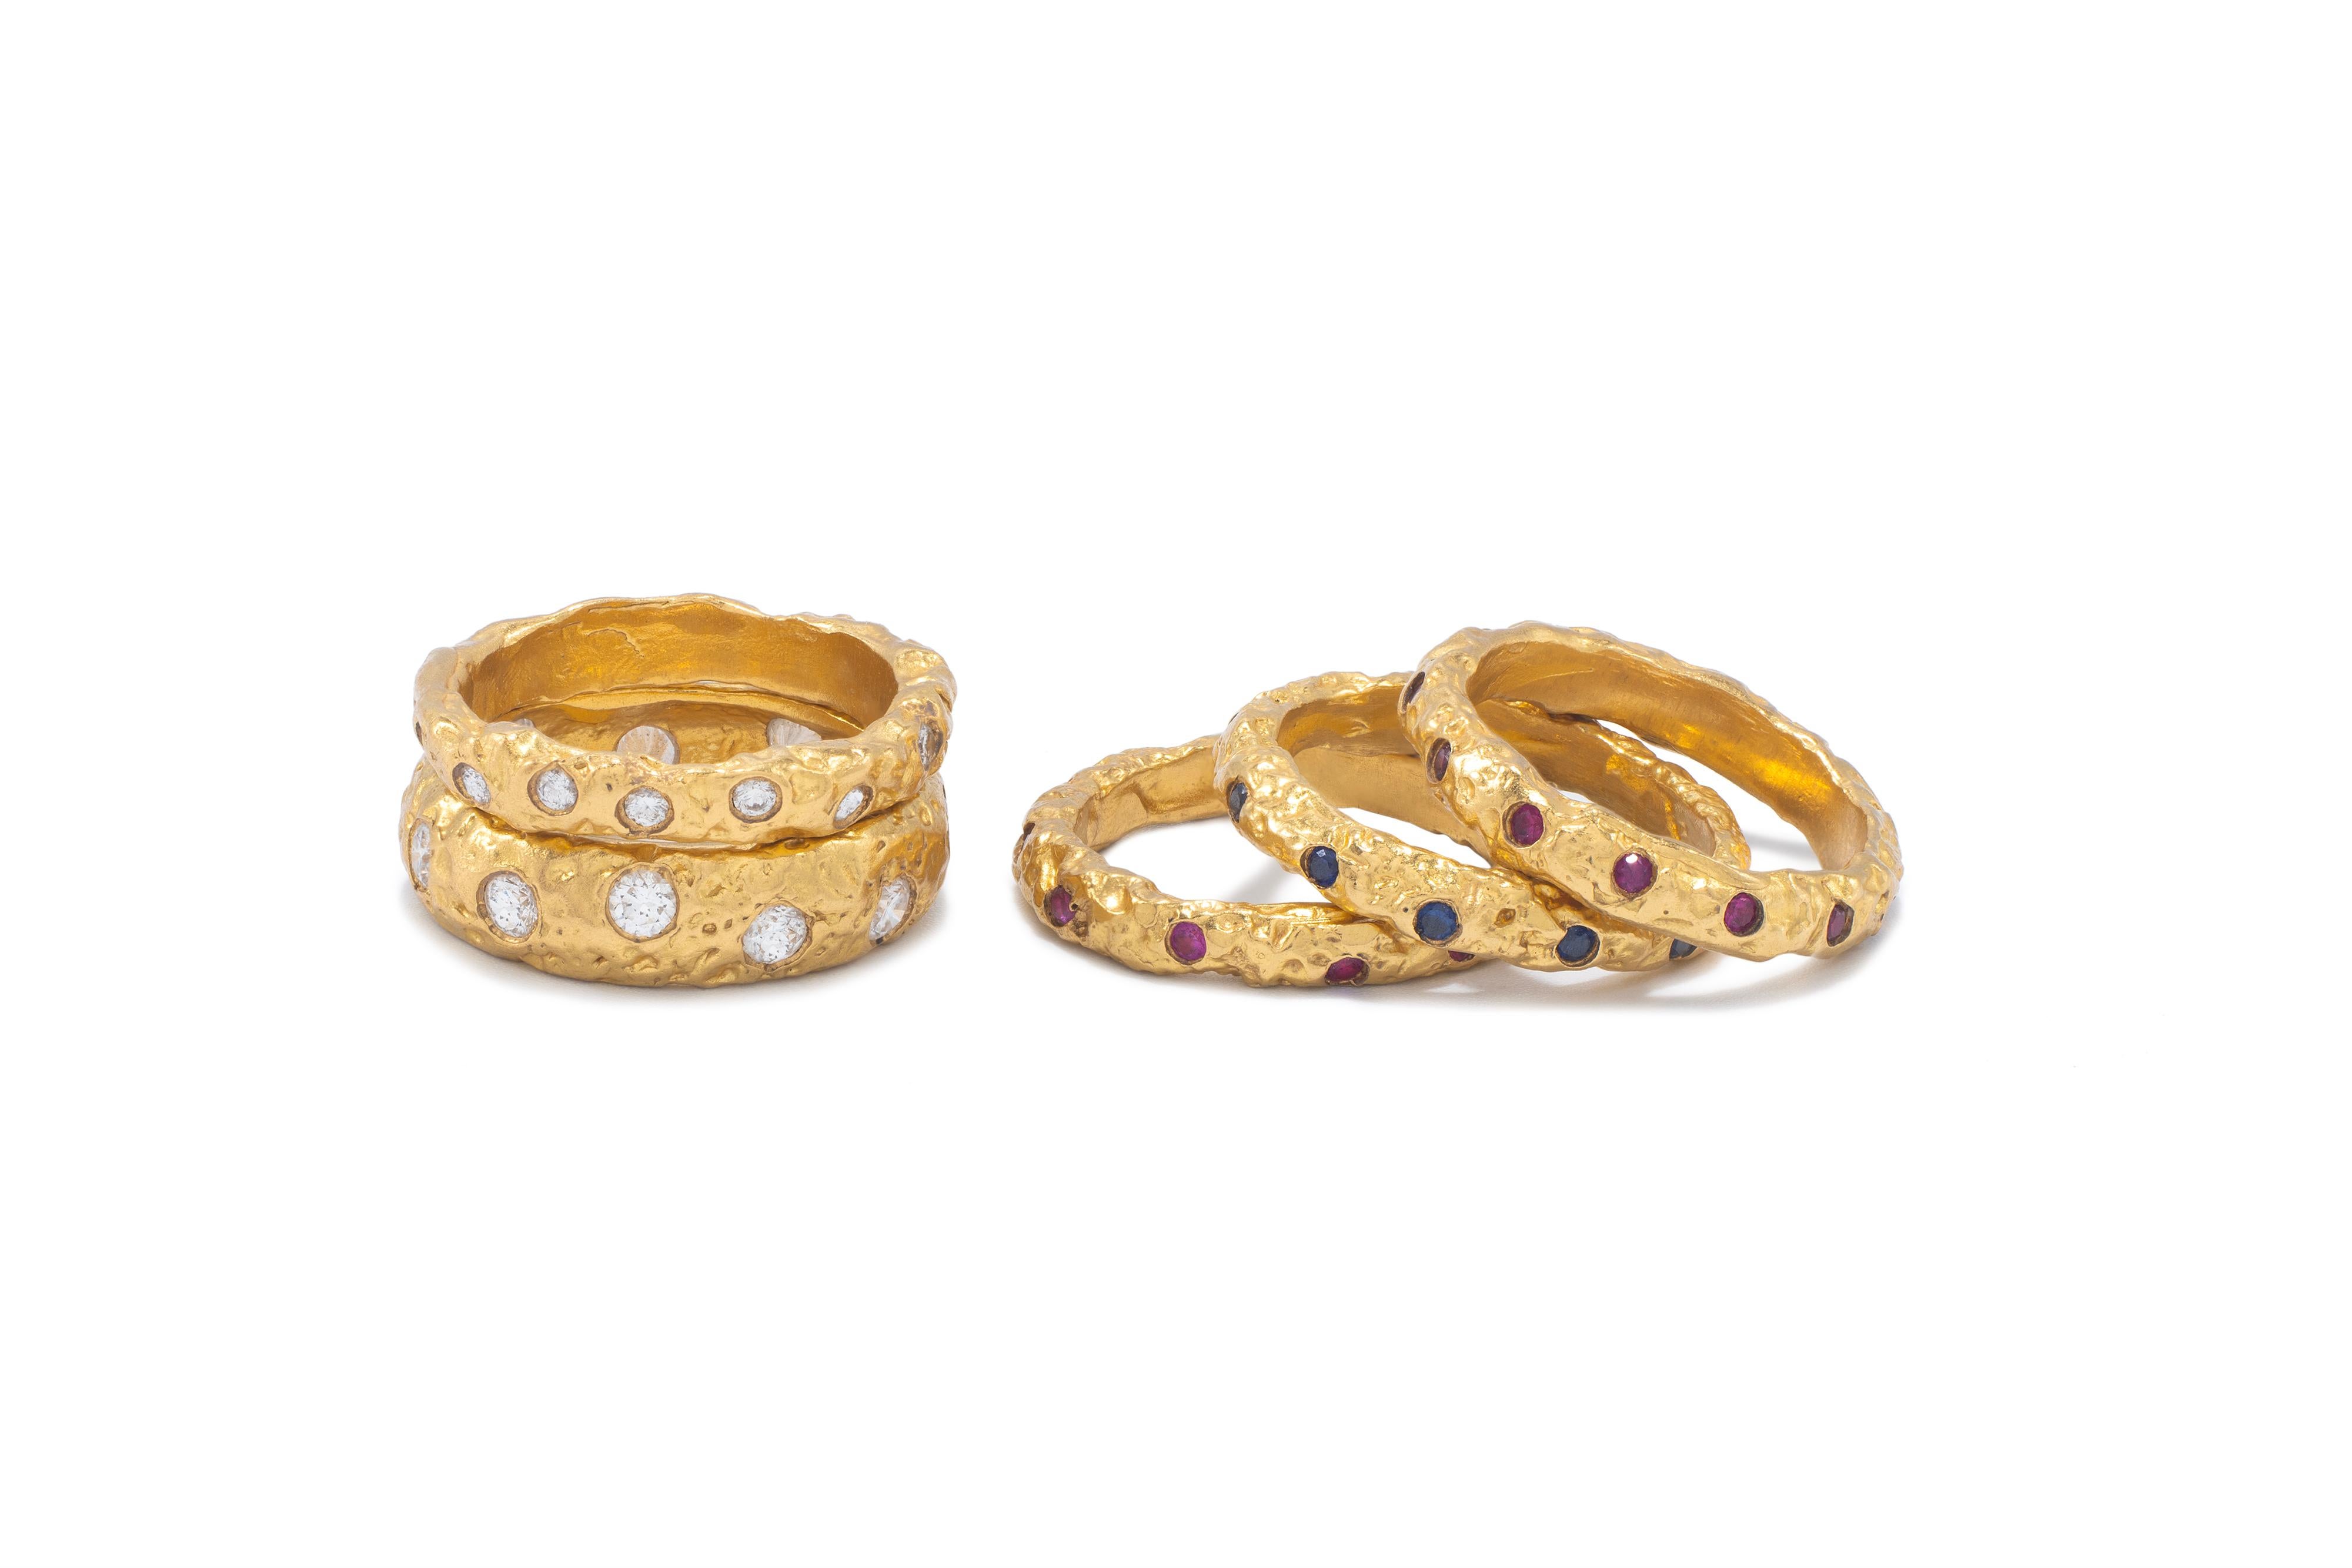 22k Gold Chunky Foil Stacking Rings with Diamonds, by Tagili In New Condition For Sale In New York, NY